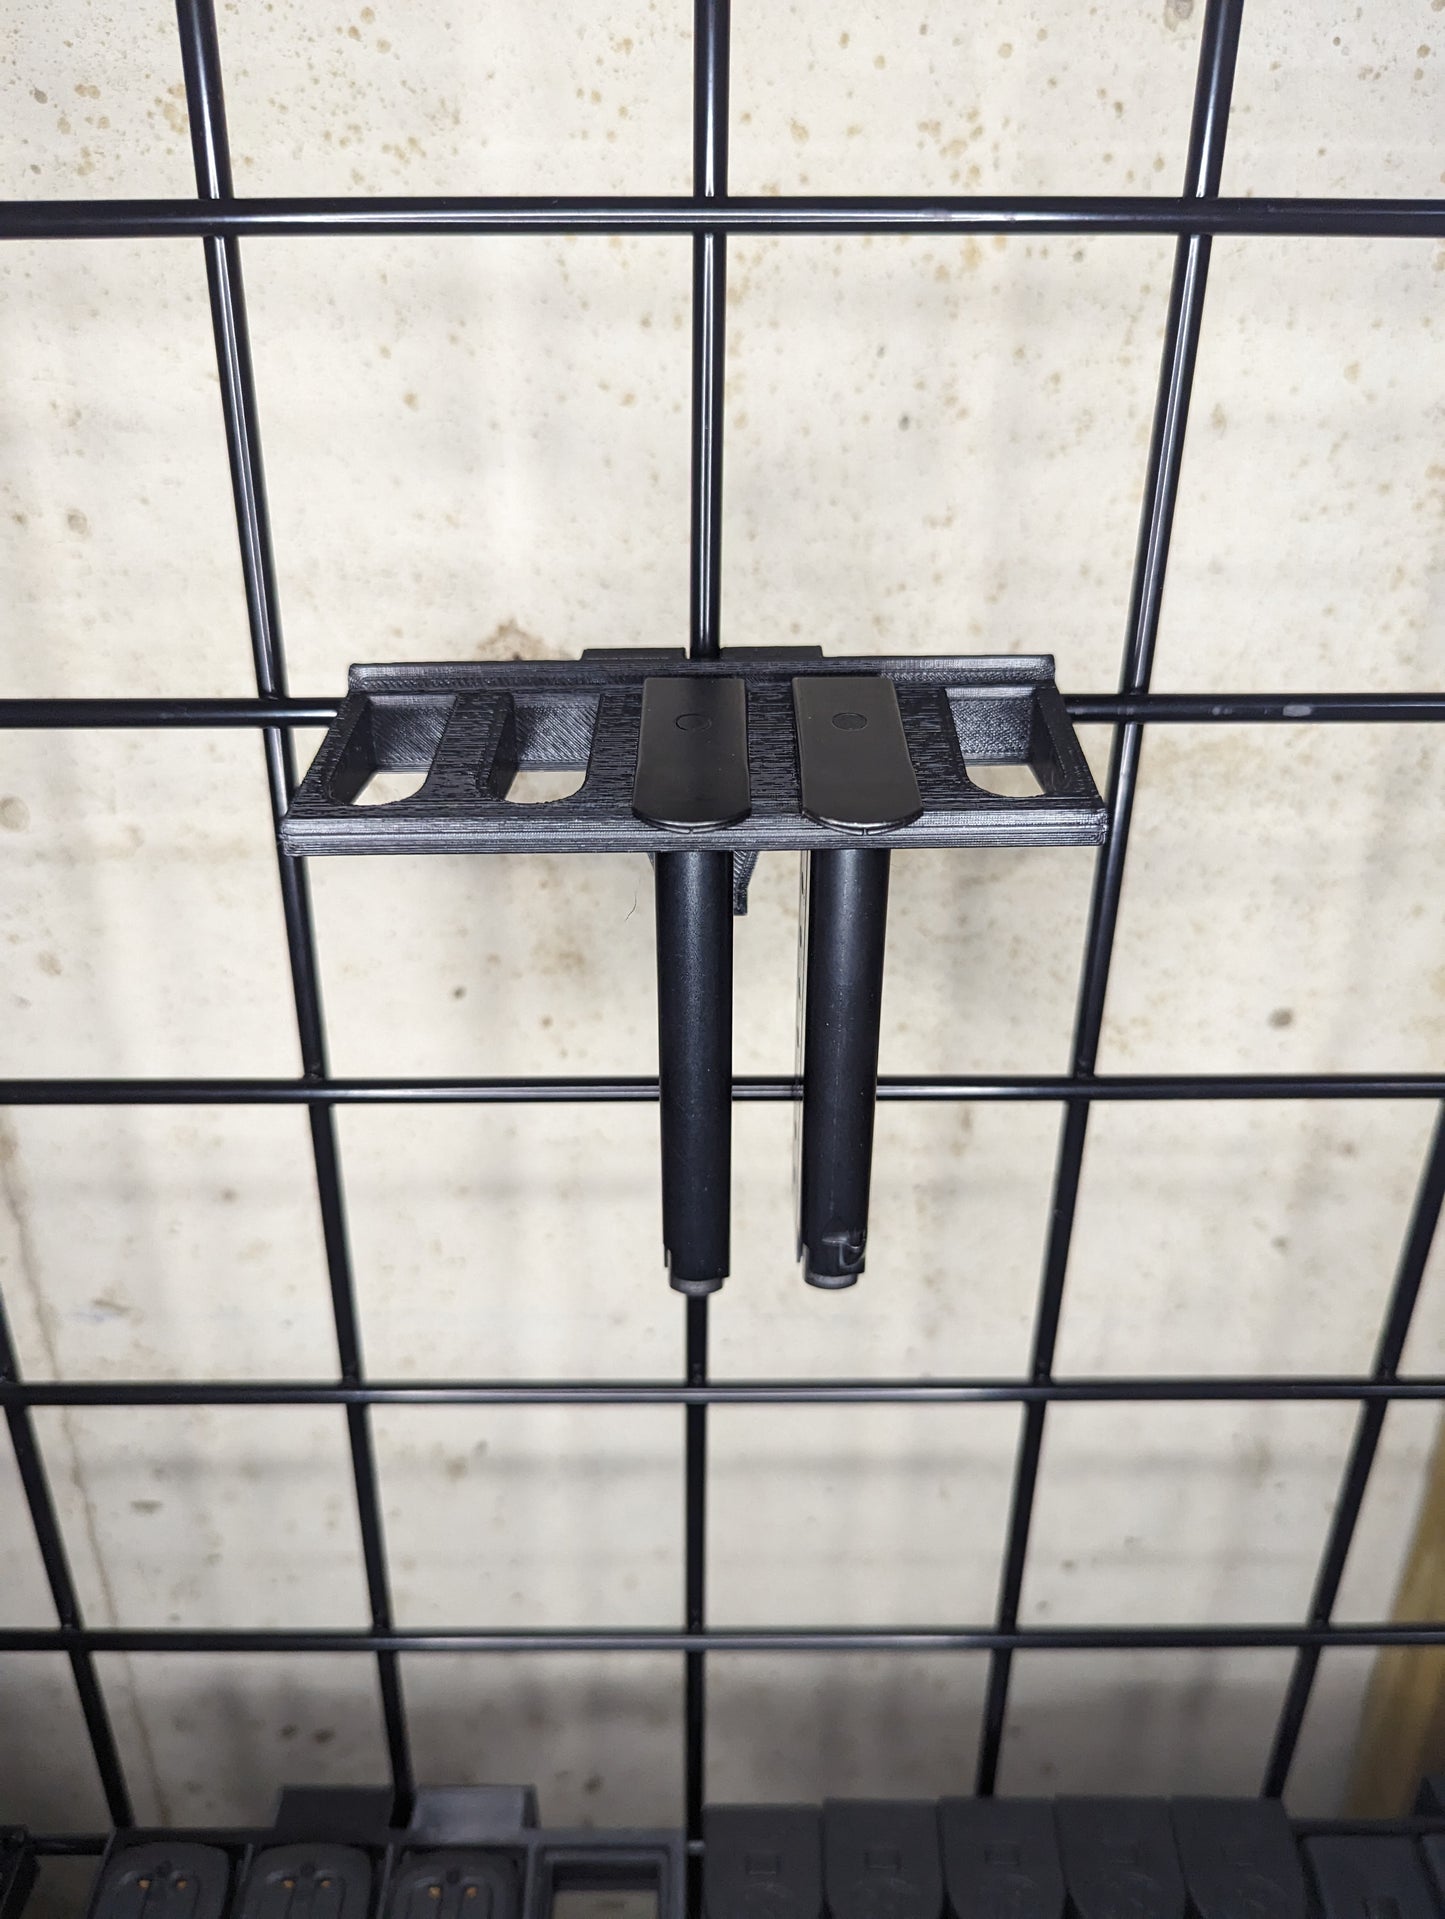 Mount for HK P7 Mags - Gridwall | Magazine Holder Storage Rack